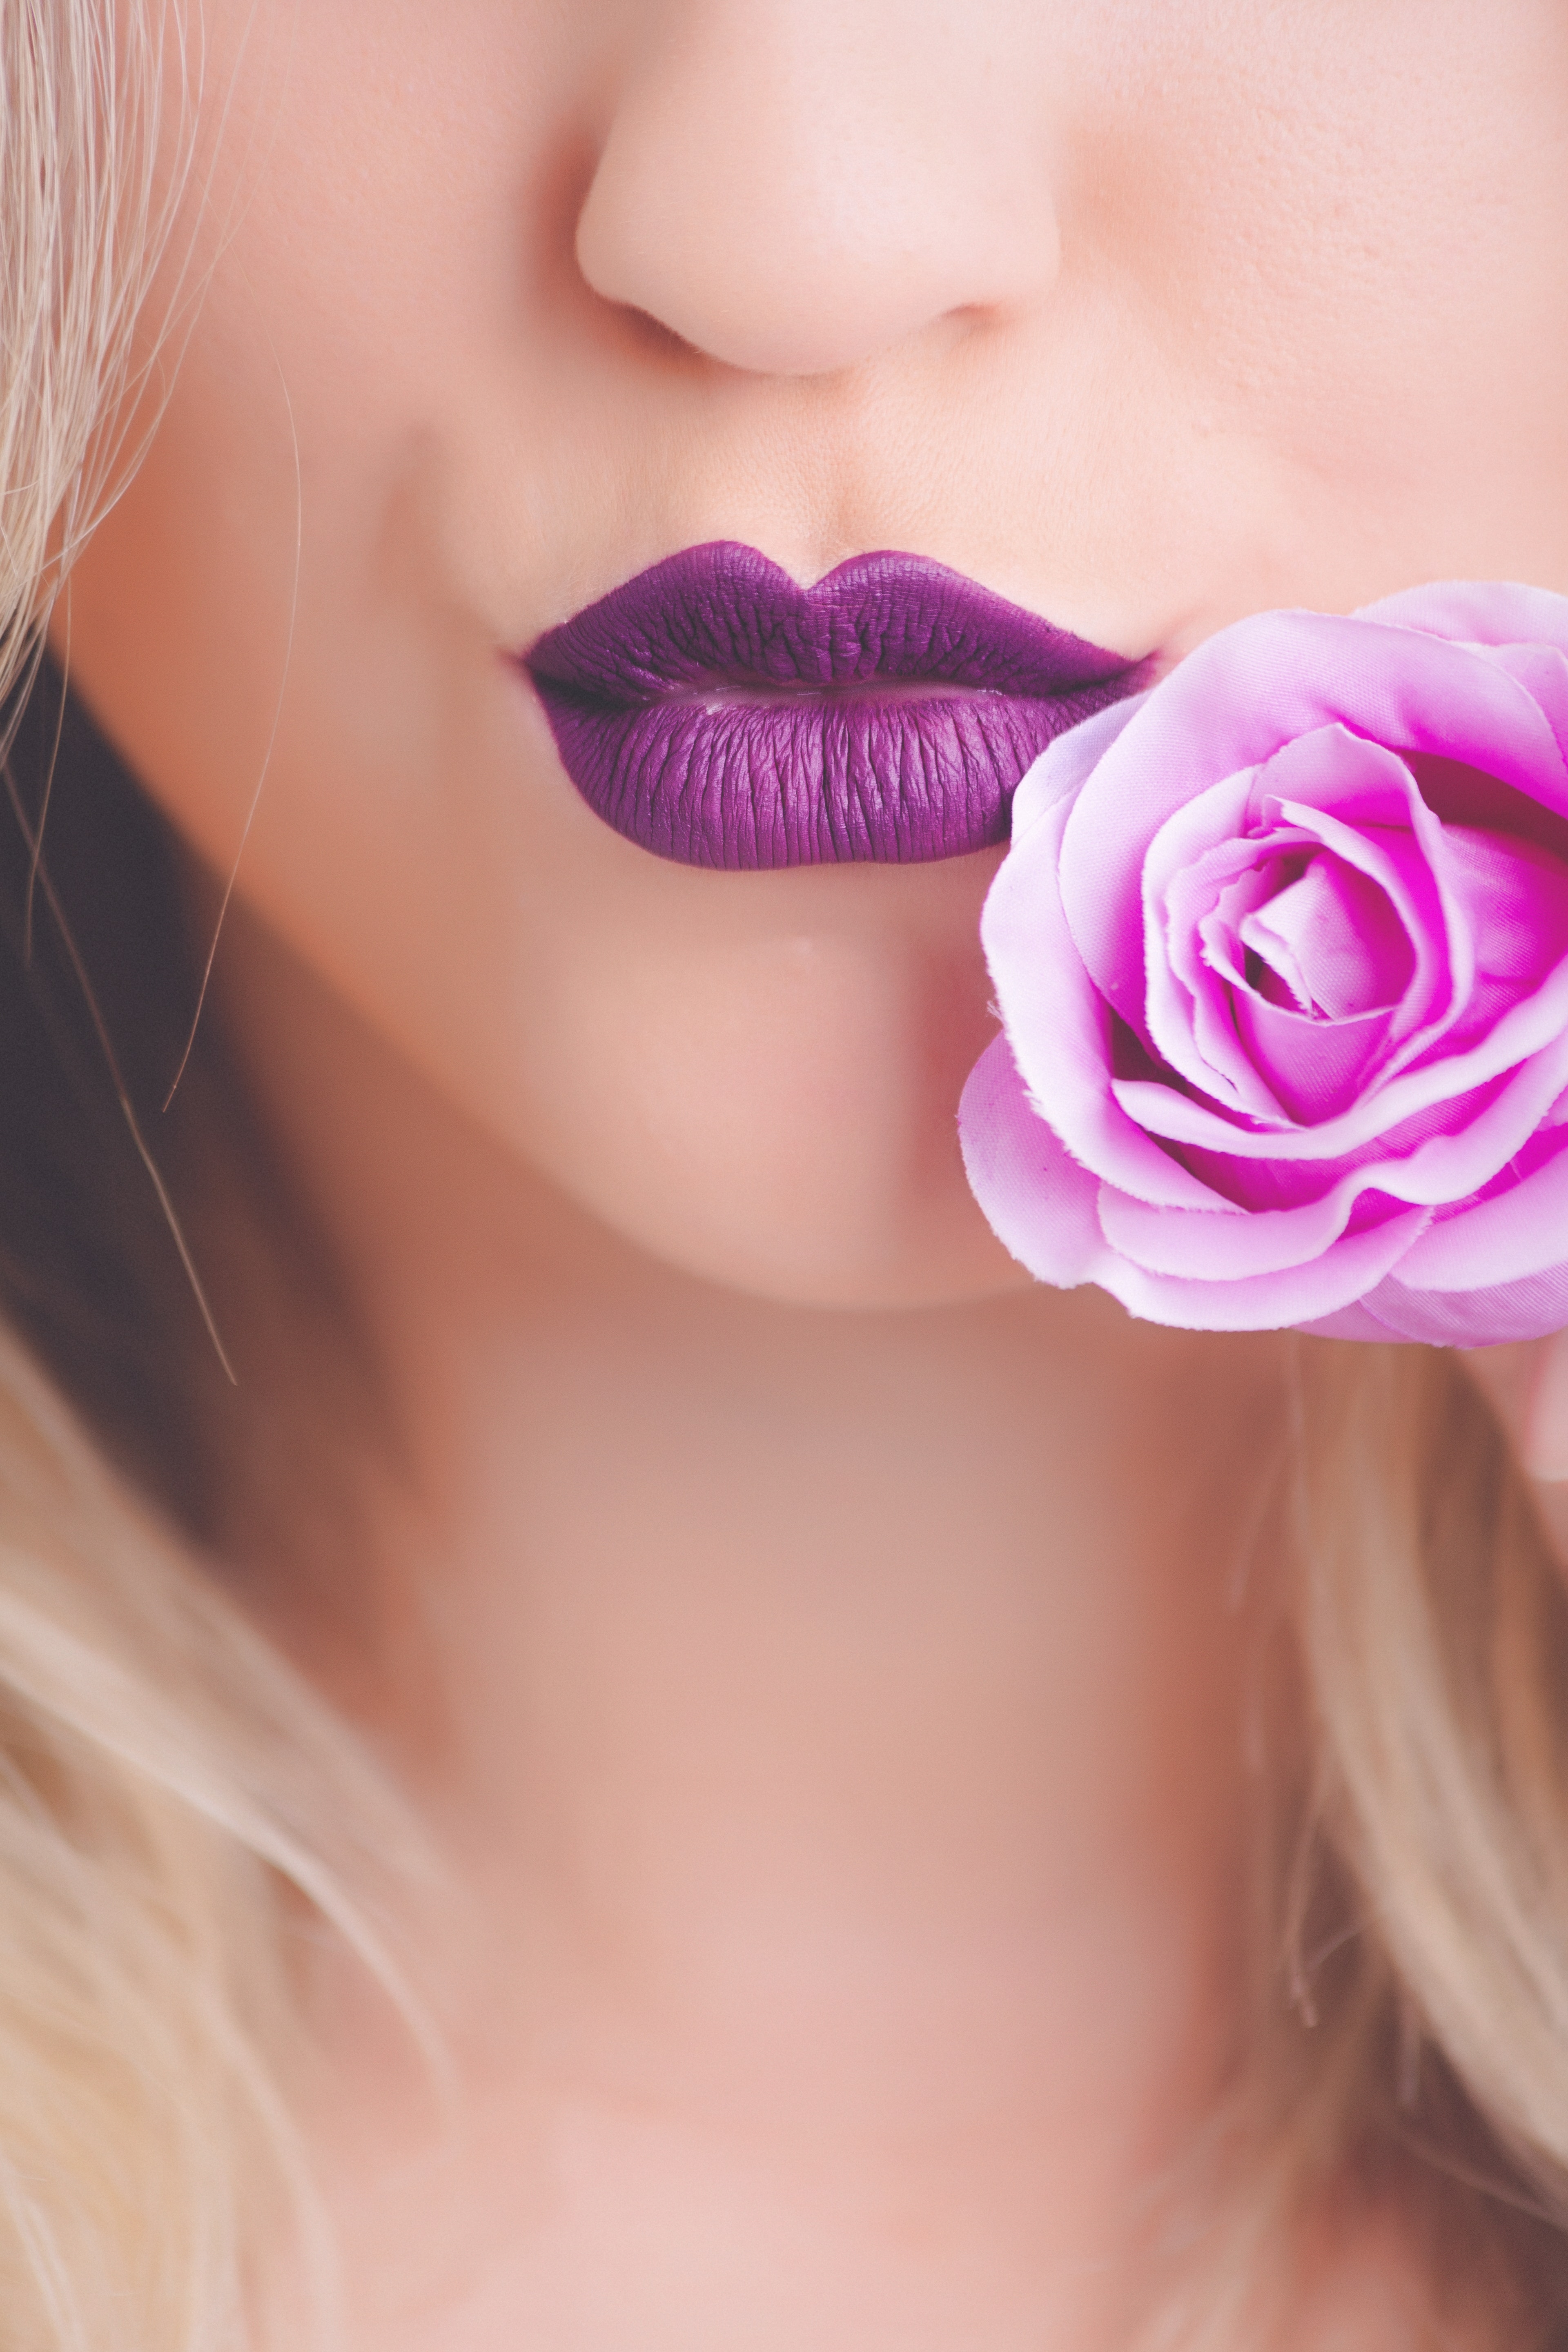 woman-wearing-purple-lipstick-with-pink-rose-on-her-cheeks.jpg